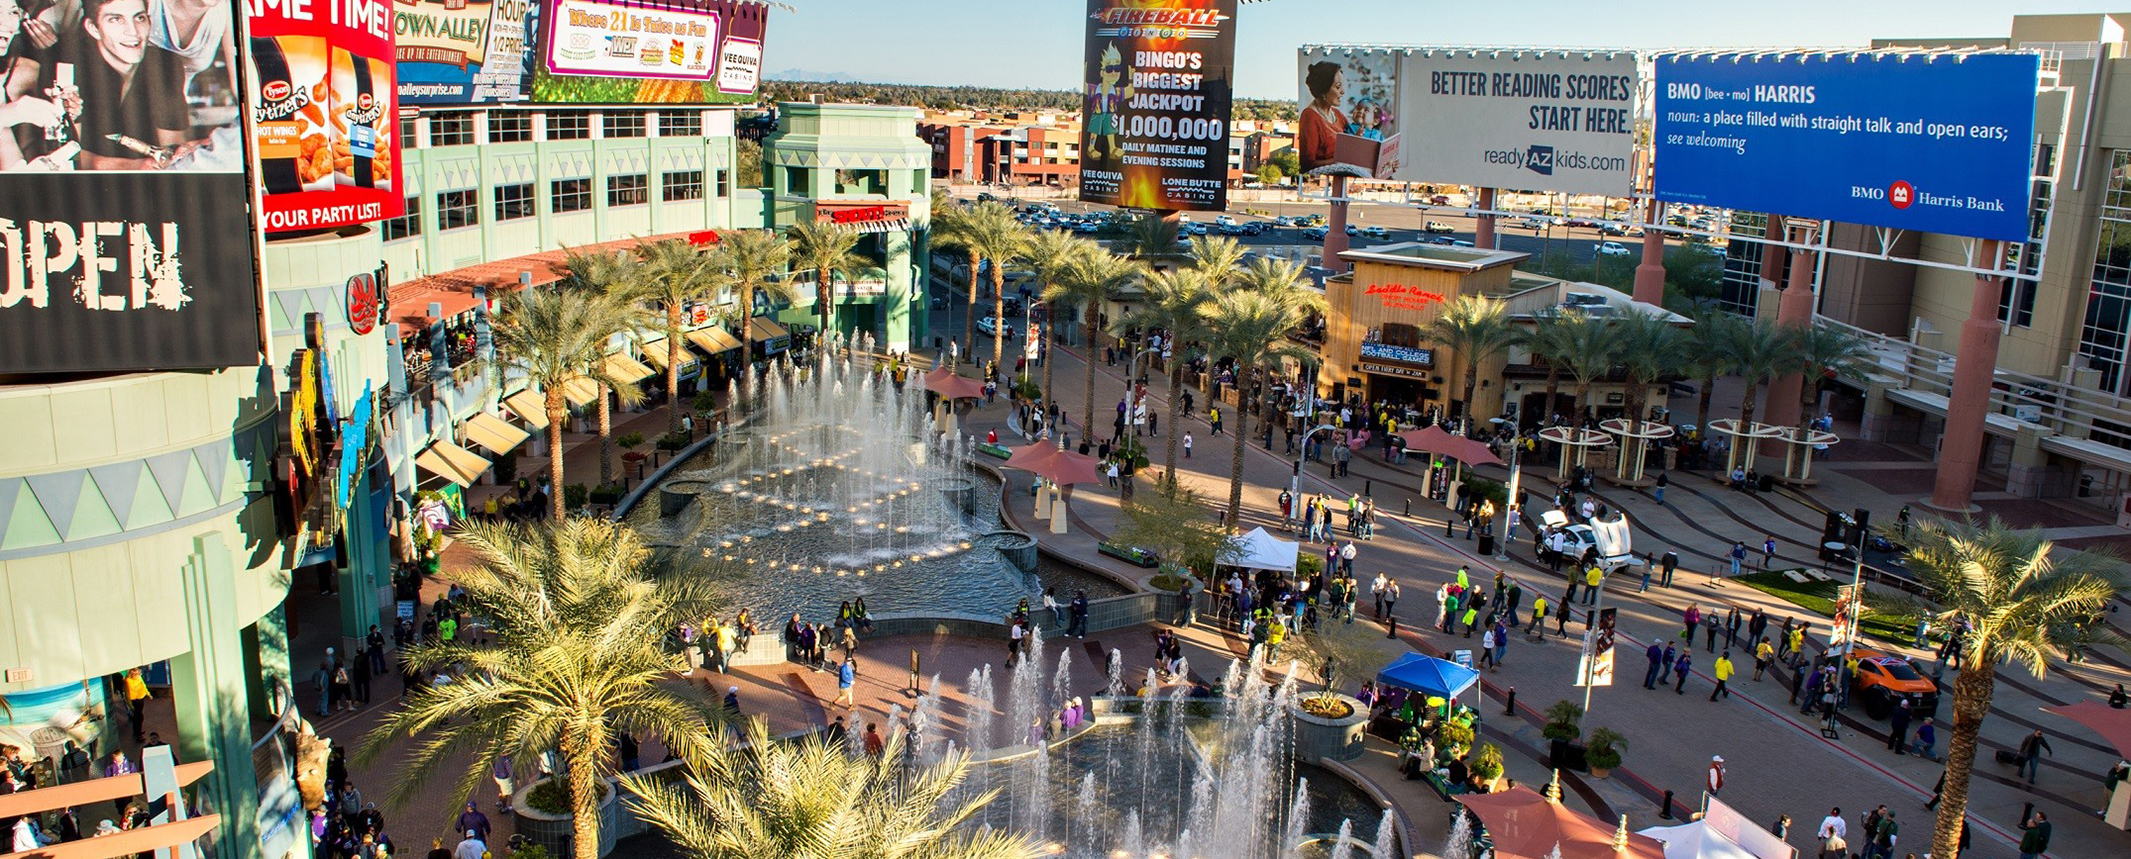 Glendale, AZ Cultural and Entertainment Opportunities